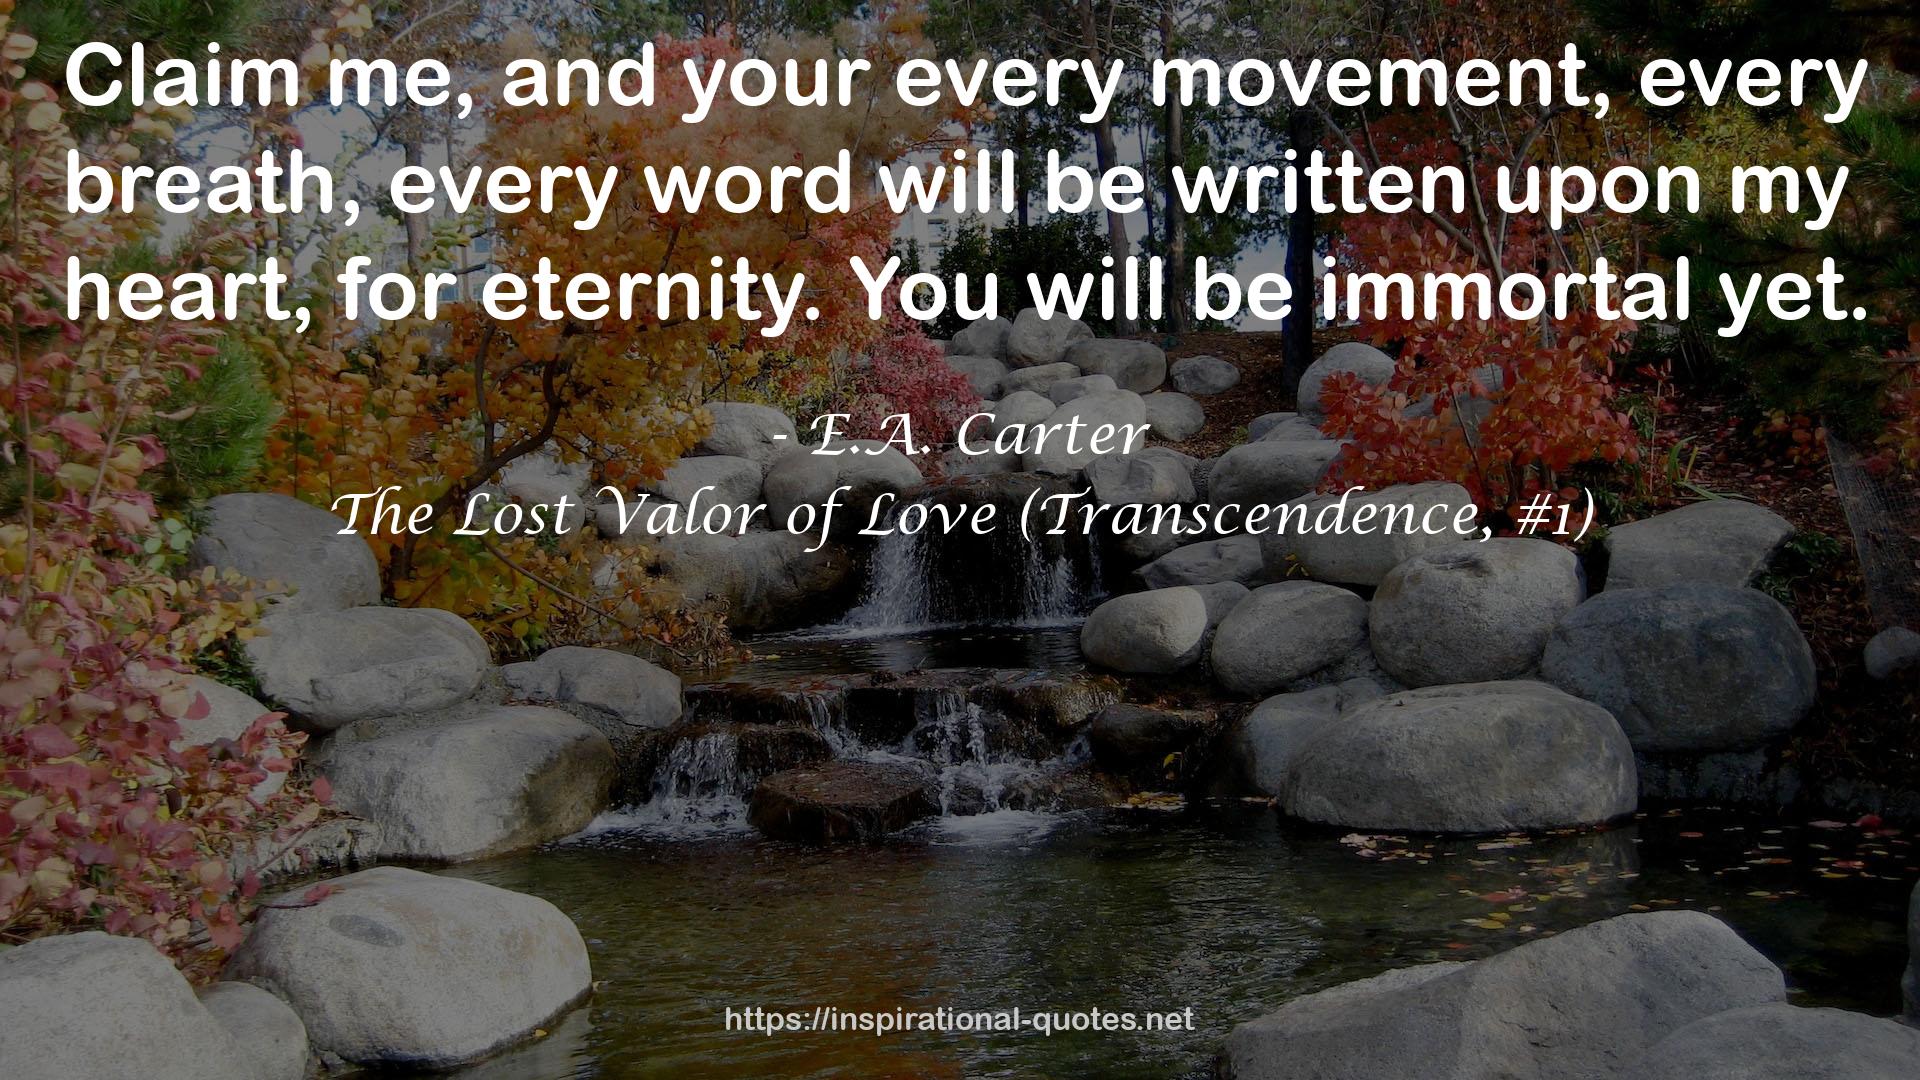 The Lost Valor of Love (Transcendence, #1) QUOTES